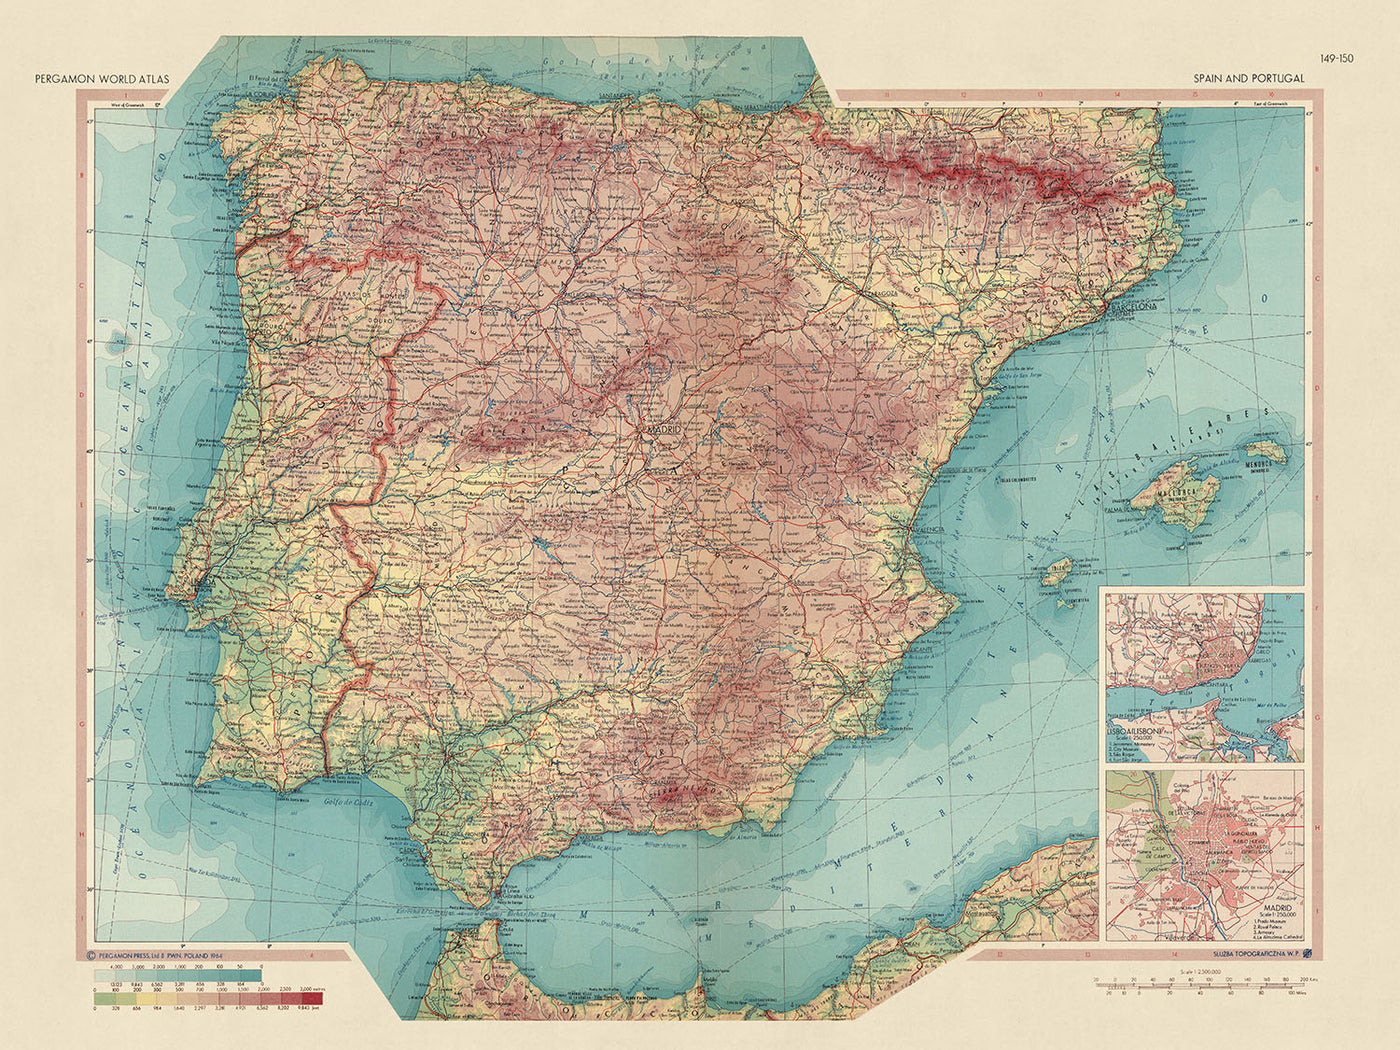 Old Map of Spain and Portugal, 1967: Madrid, Barcelona, Valencia, Seville, Lisbon